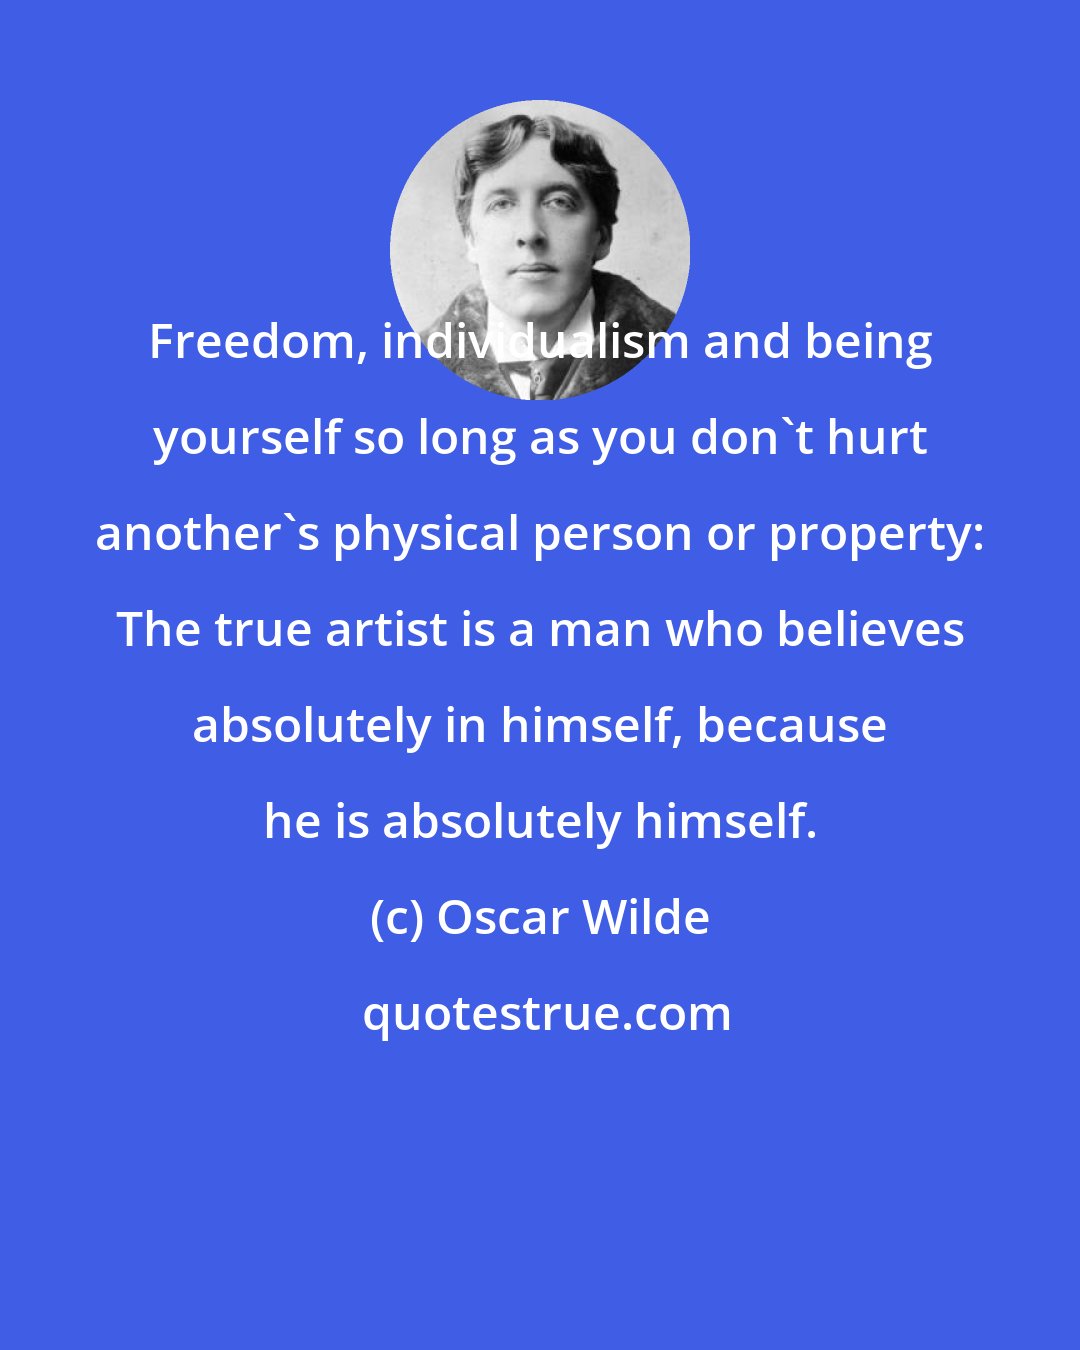 Oscar Wilde: Freedom, individualism and being yourself so long as you don't hurt another's physical person or property: The true artist is a man who believes absolutely in himself, because he is absolutely himself.